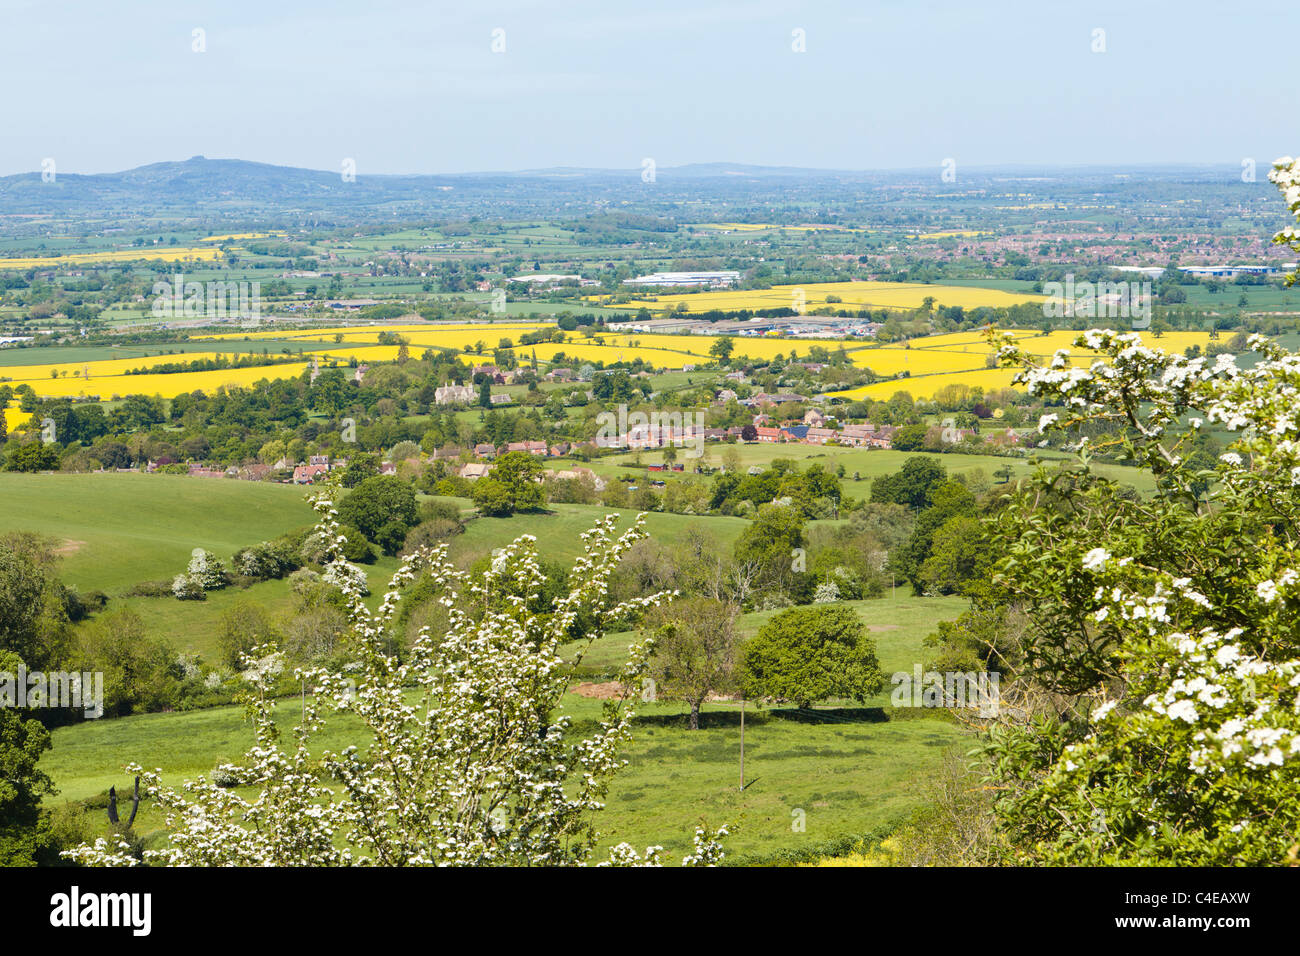 The view across the Severn Vale to the Forest of Dean from Haresfield Hill, Gloucestershire  - Haresfield is in the foreground Stock Photo